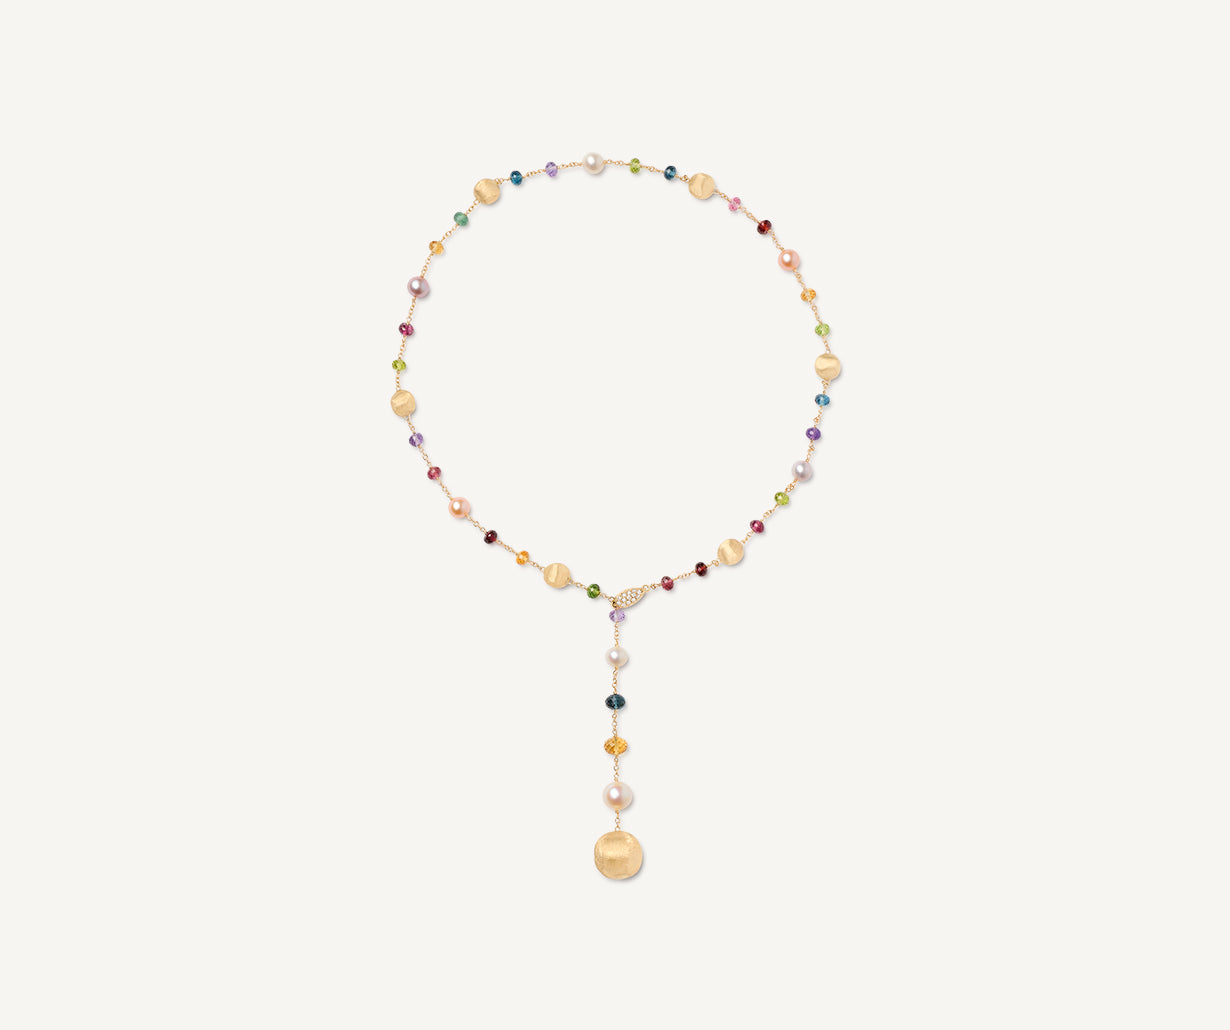 Mixed gemstones with 18k yellow gold and diamonds Africa necklace lariat design by Marco Bicego